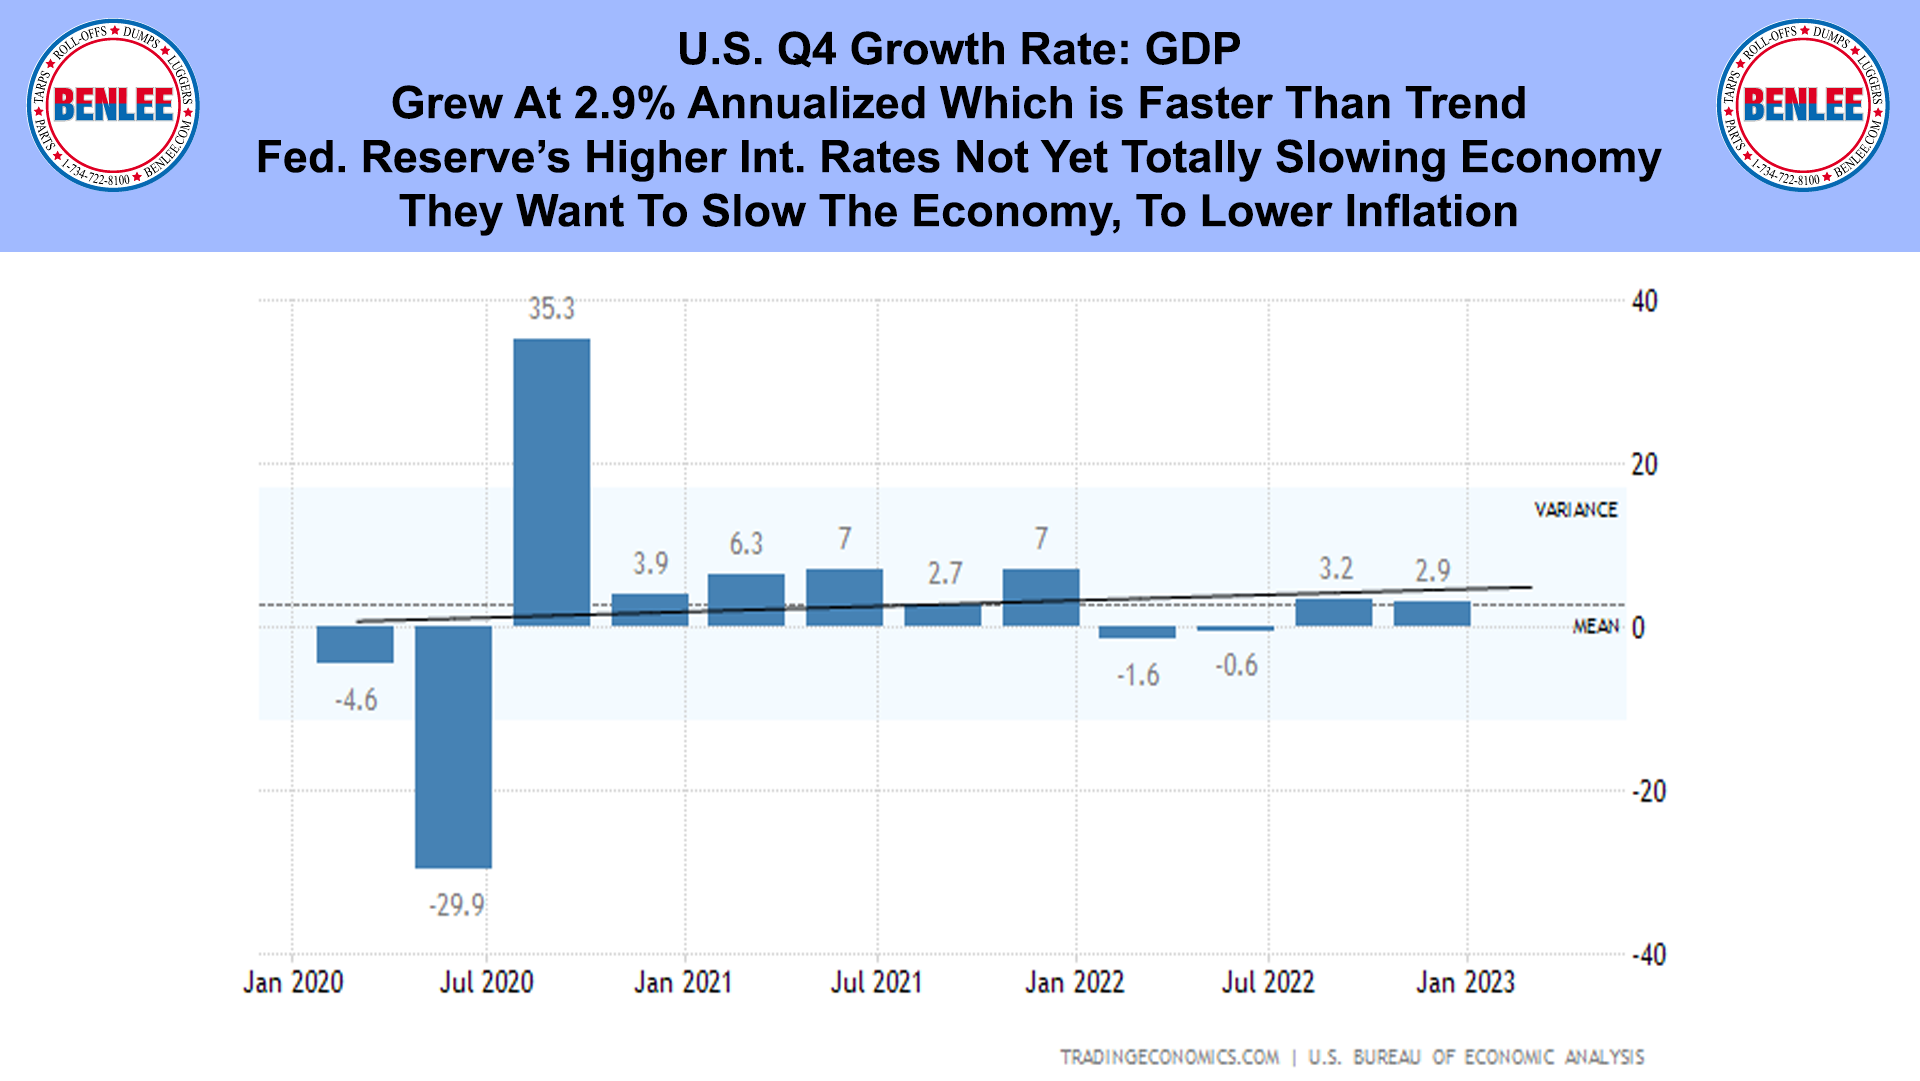 U.S. Q4 Growth Rate GDP